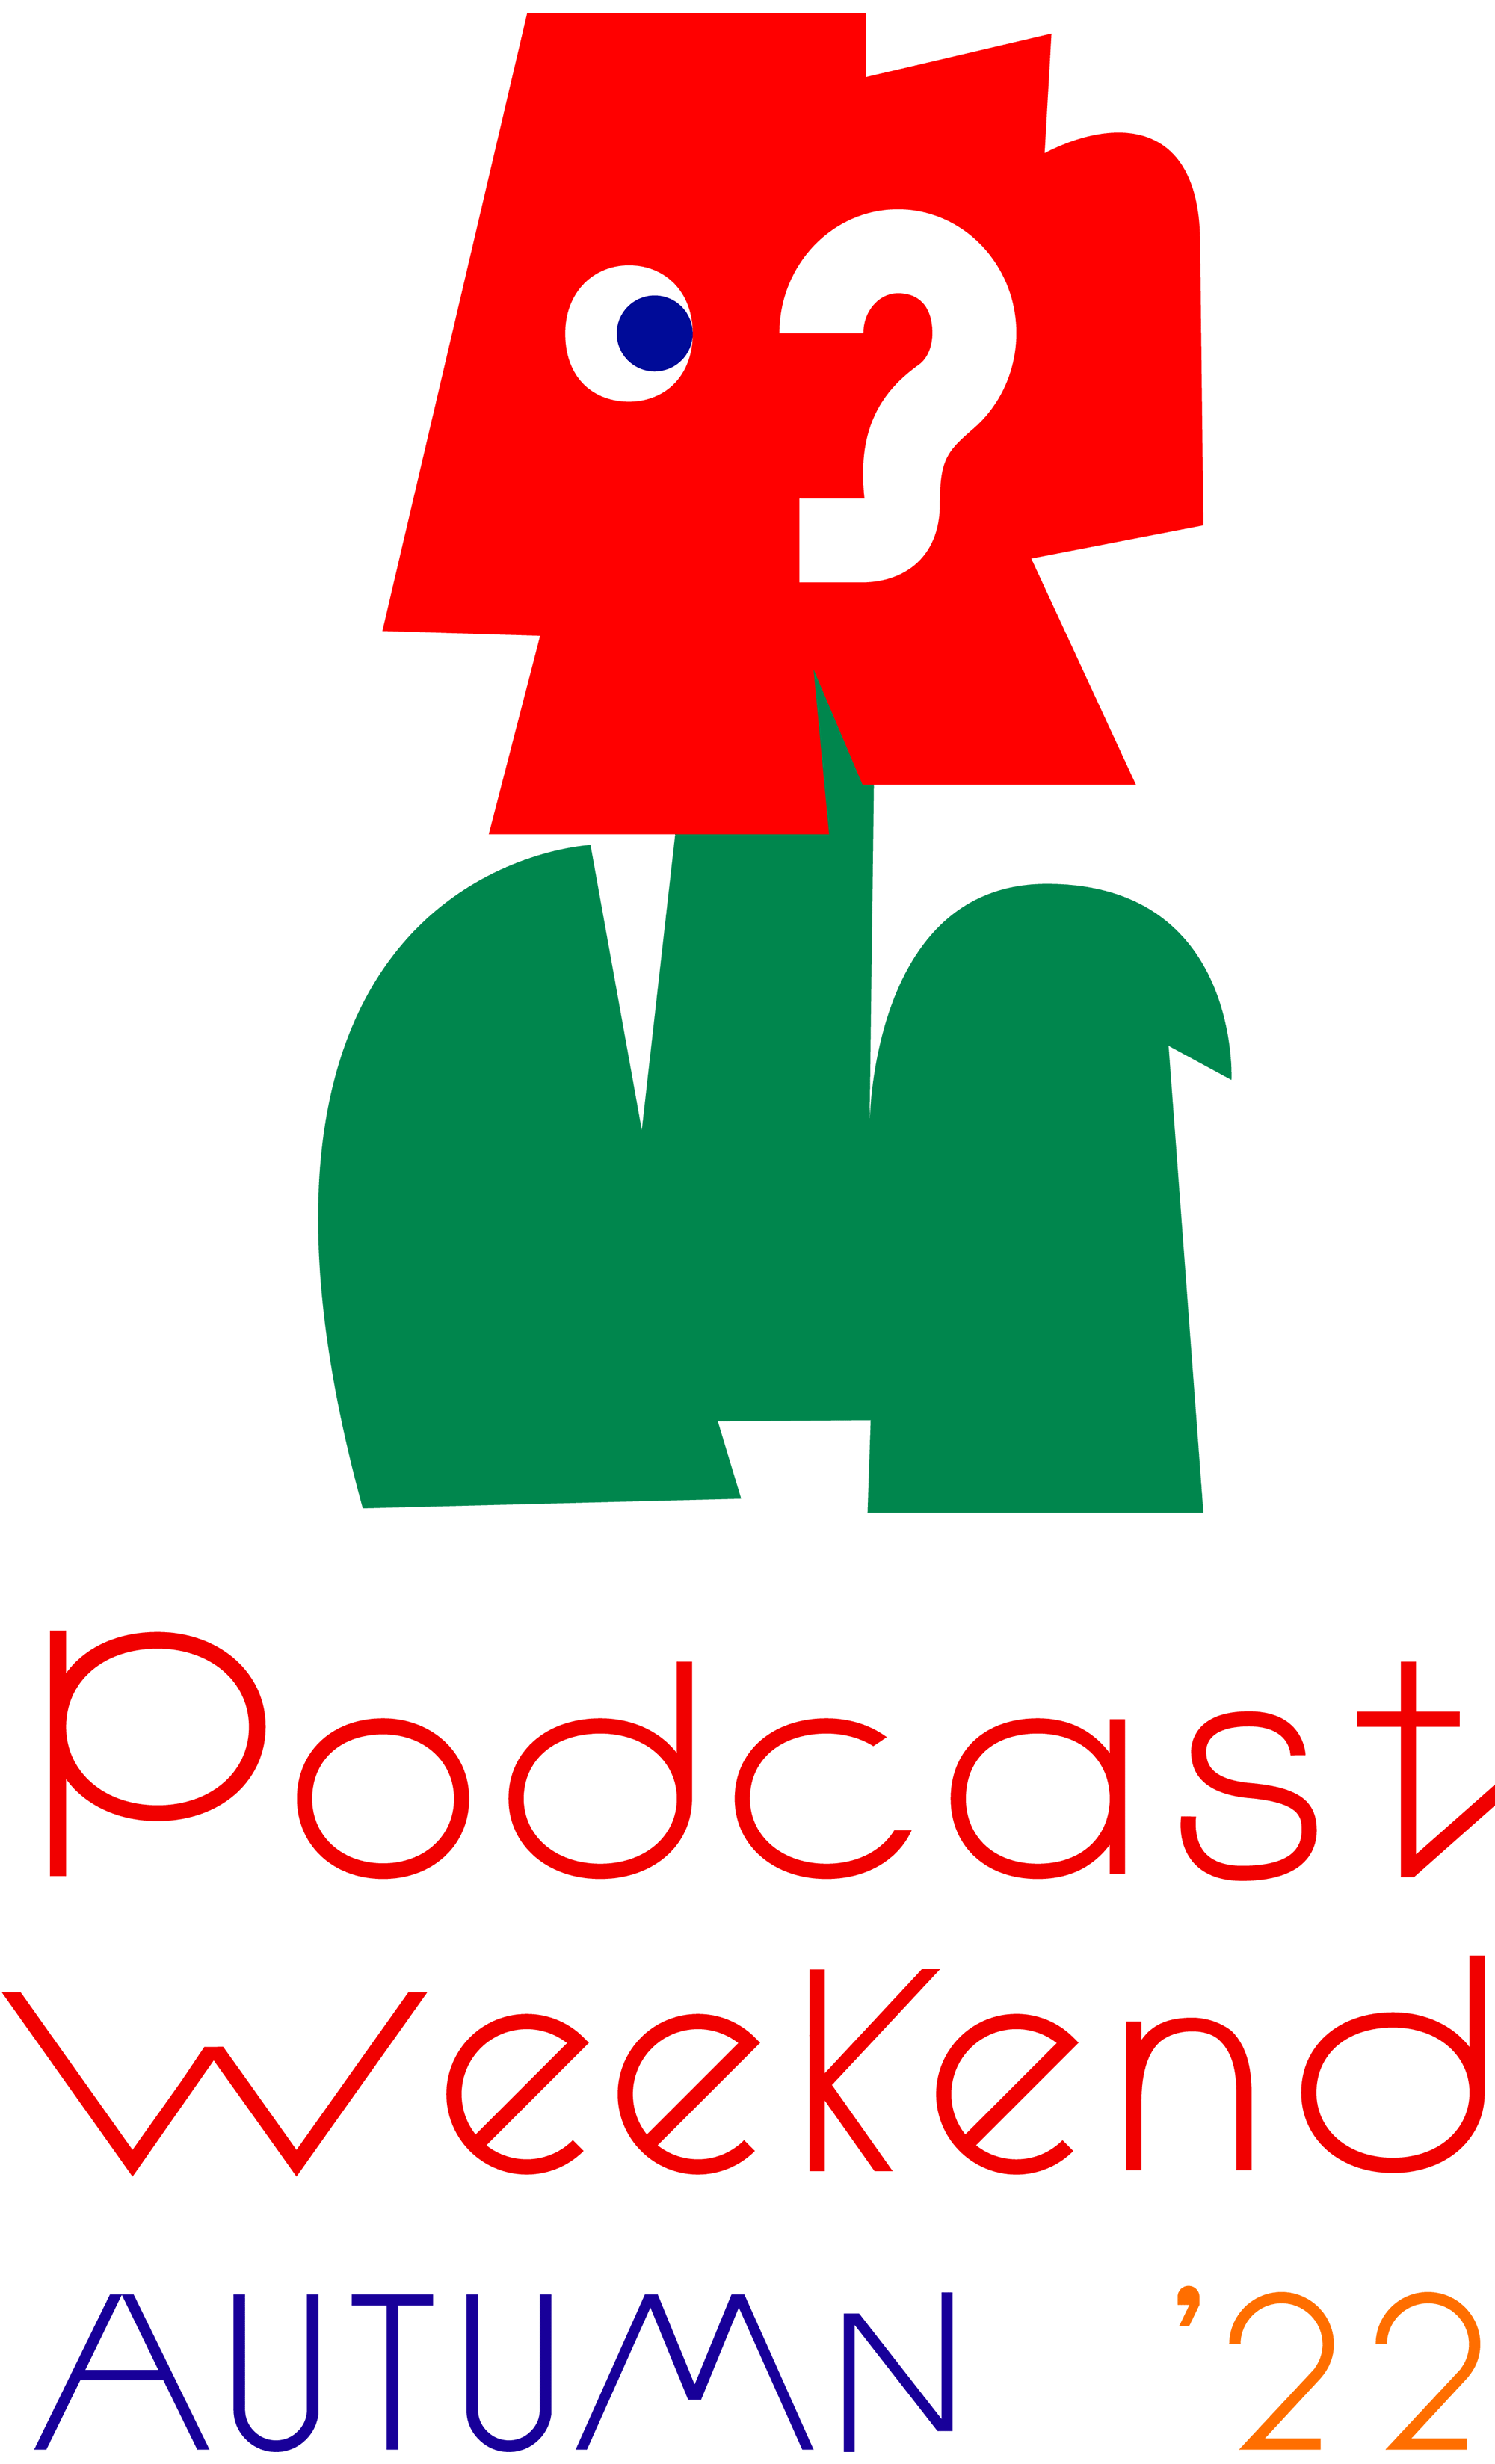 Podcast Weekend